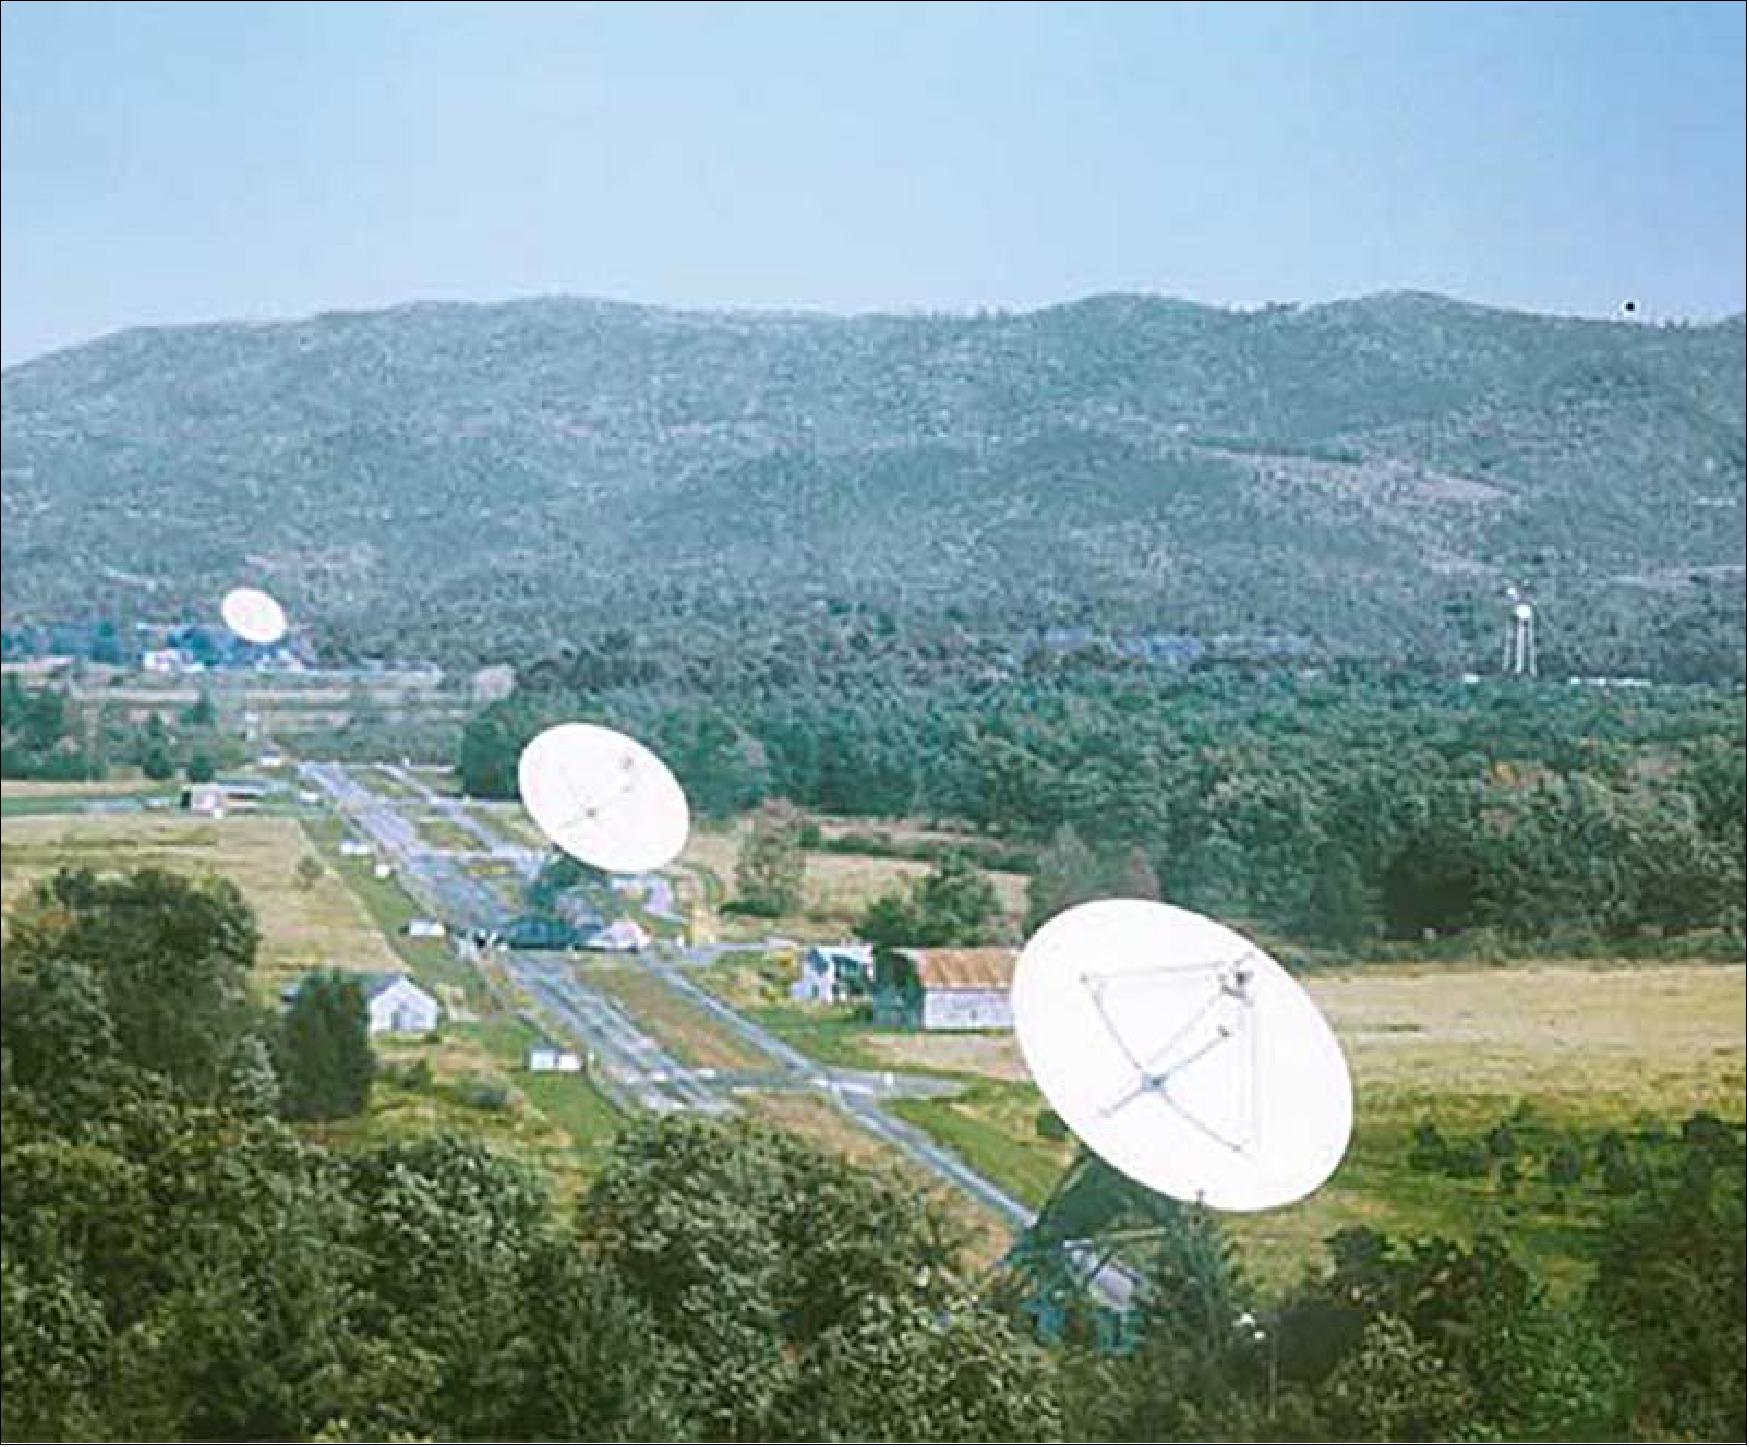 Figure 4: These three identical 85-foot dish antennas worked together as the GBI (Green Bank Interferometer), a testbed for the VLA. Two of the antennas can be hauled to different locations along the road linking them (image credit: NRAO)